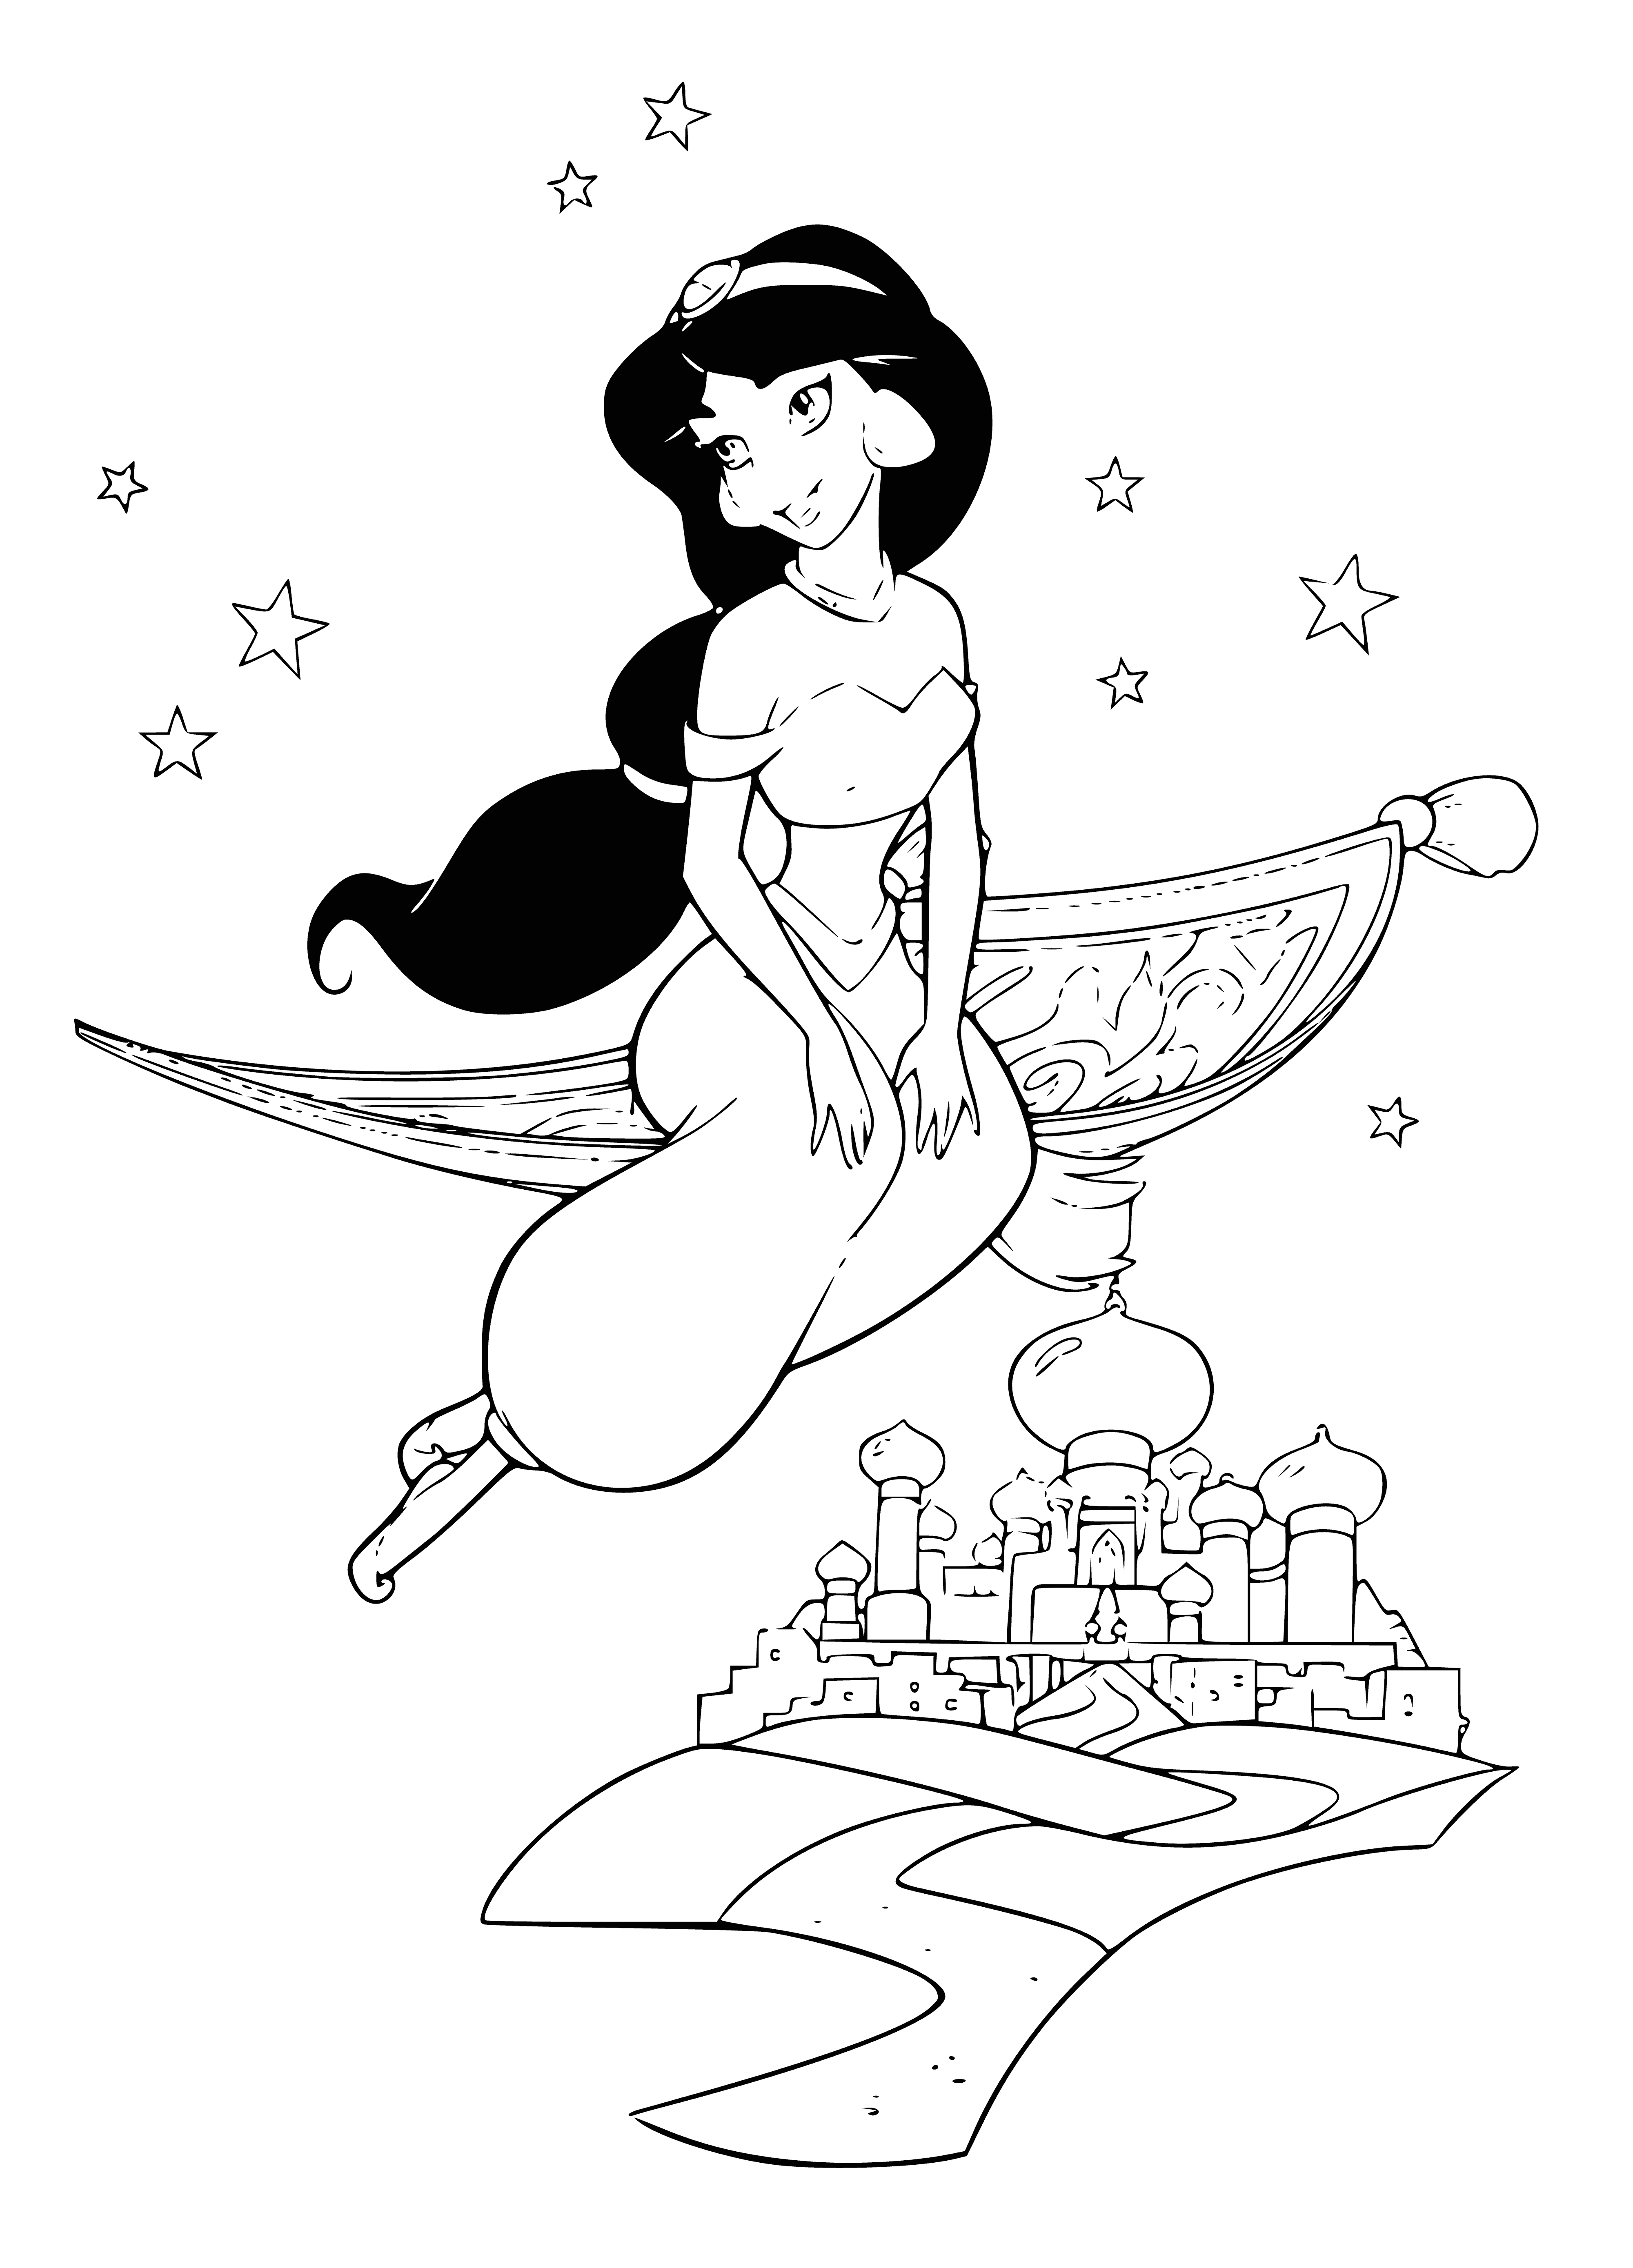 coloring page: Princess Jasmine and Aladdin stand in a cityscape surrounded by a desert. She wears purple and gold, he wears blue and white with a yellow sash. They face each other with arms crossed and held out respectively.